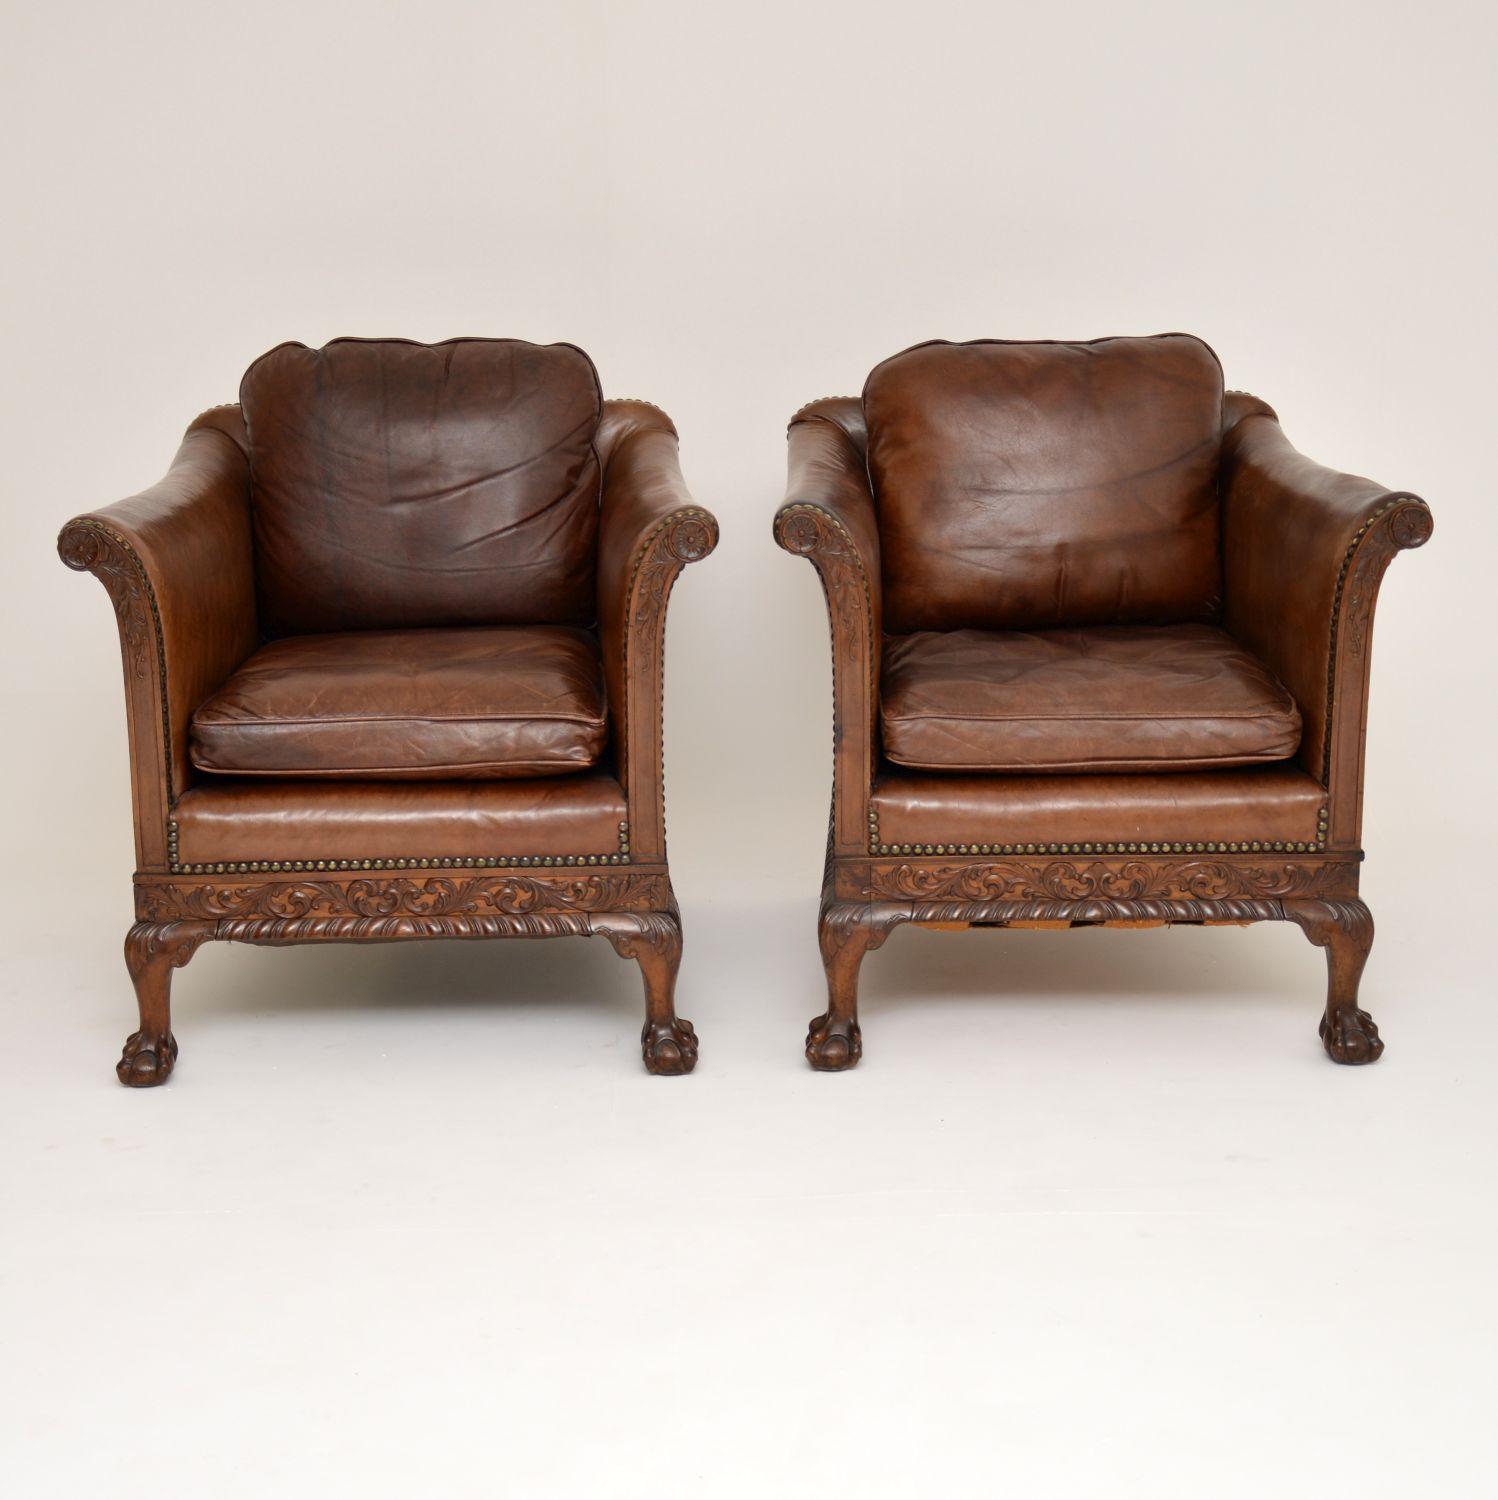 This pair of antique Swedish mahogany armchairs with leather upholstery are of Chippendale design & I would date them to circa 1890-1910 period. They are in lovely original condition, with feather filled cushions and I believe the leather could be